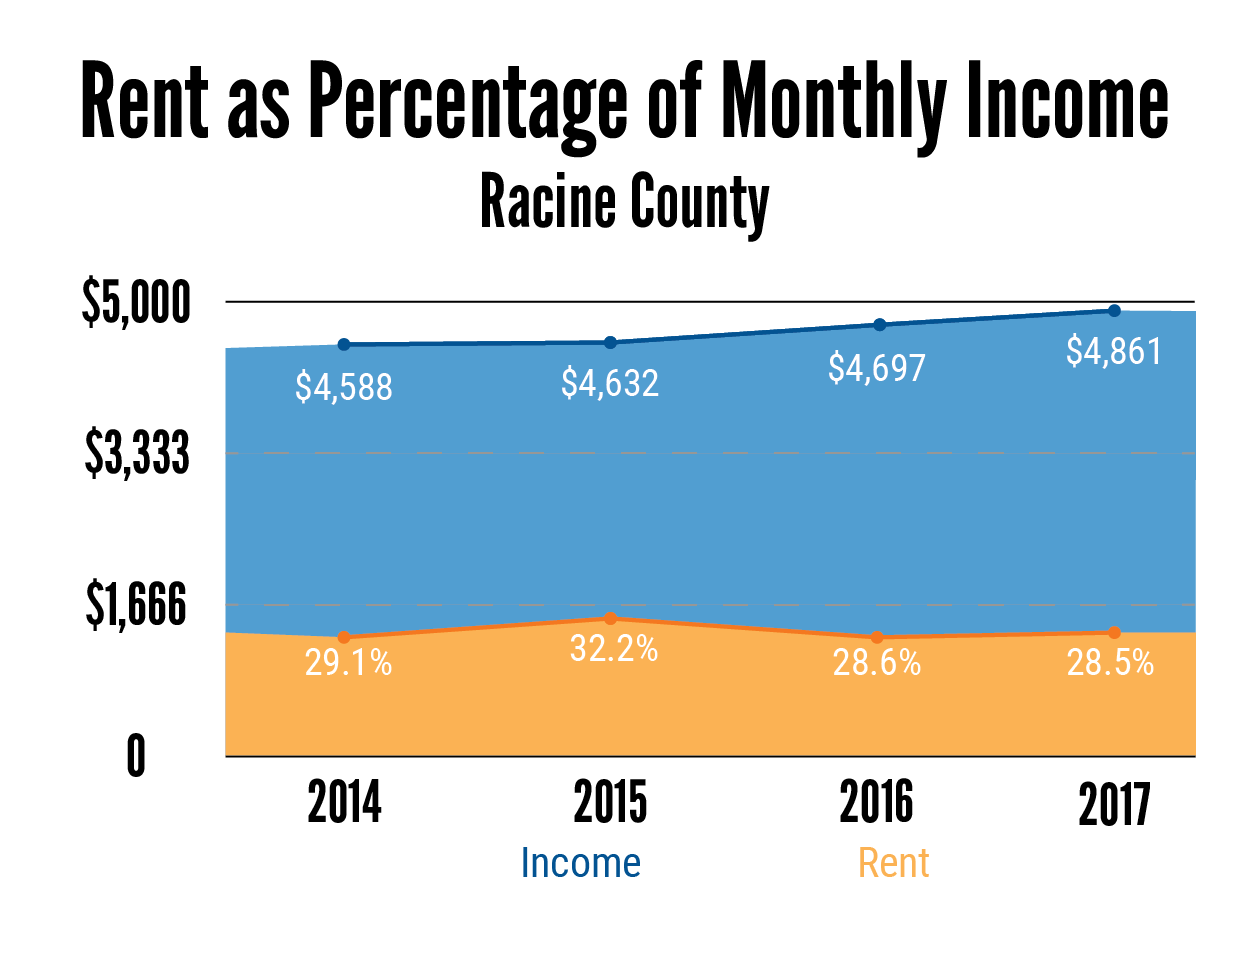 Rent as Percentage of Monthly Income